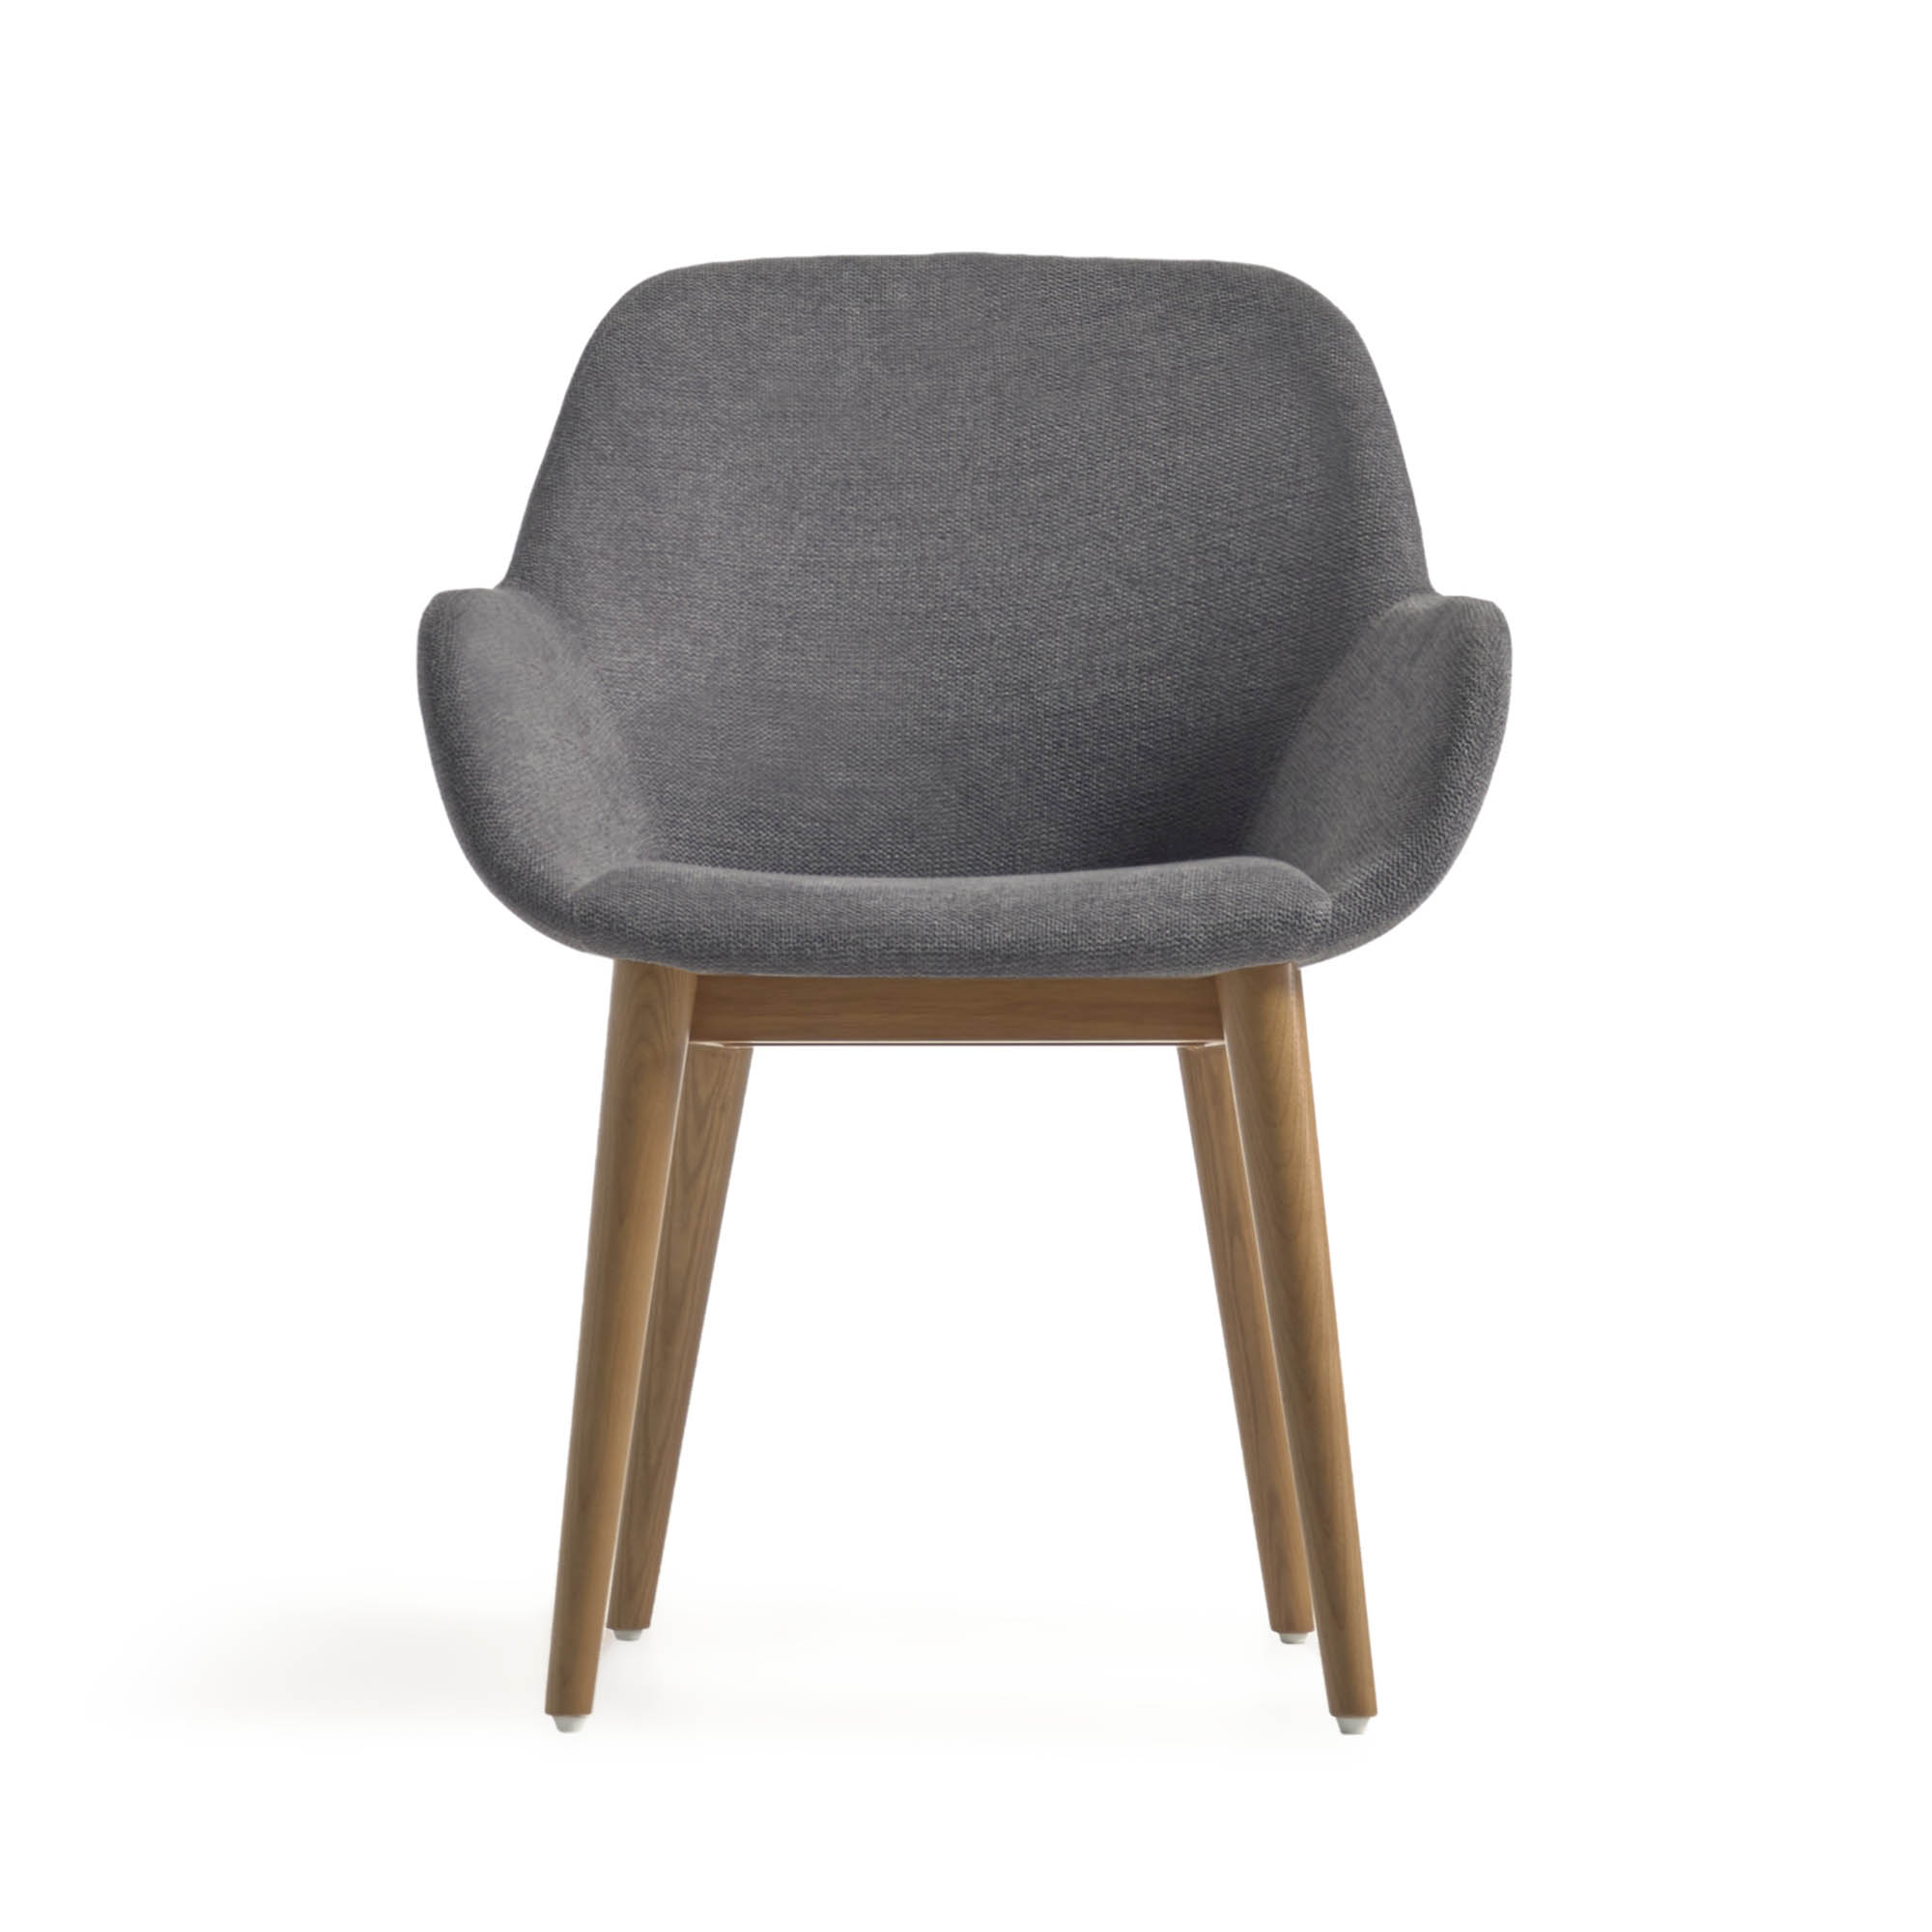 Konna Dining Chair Grey with Timber Legs